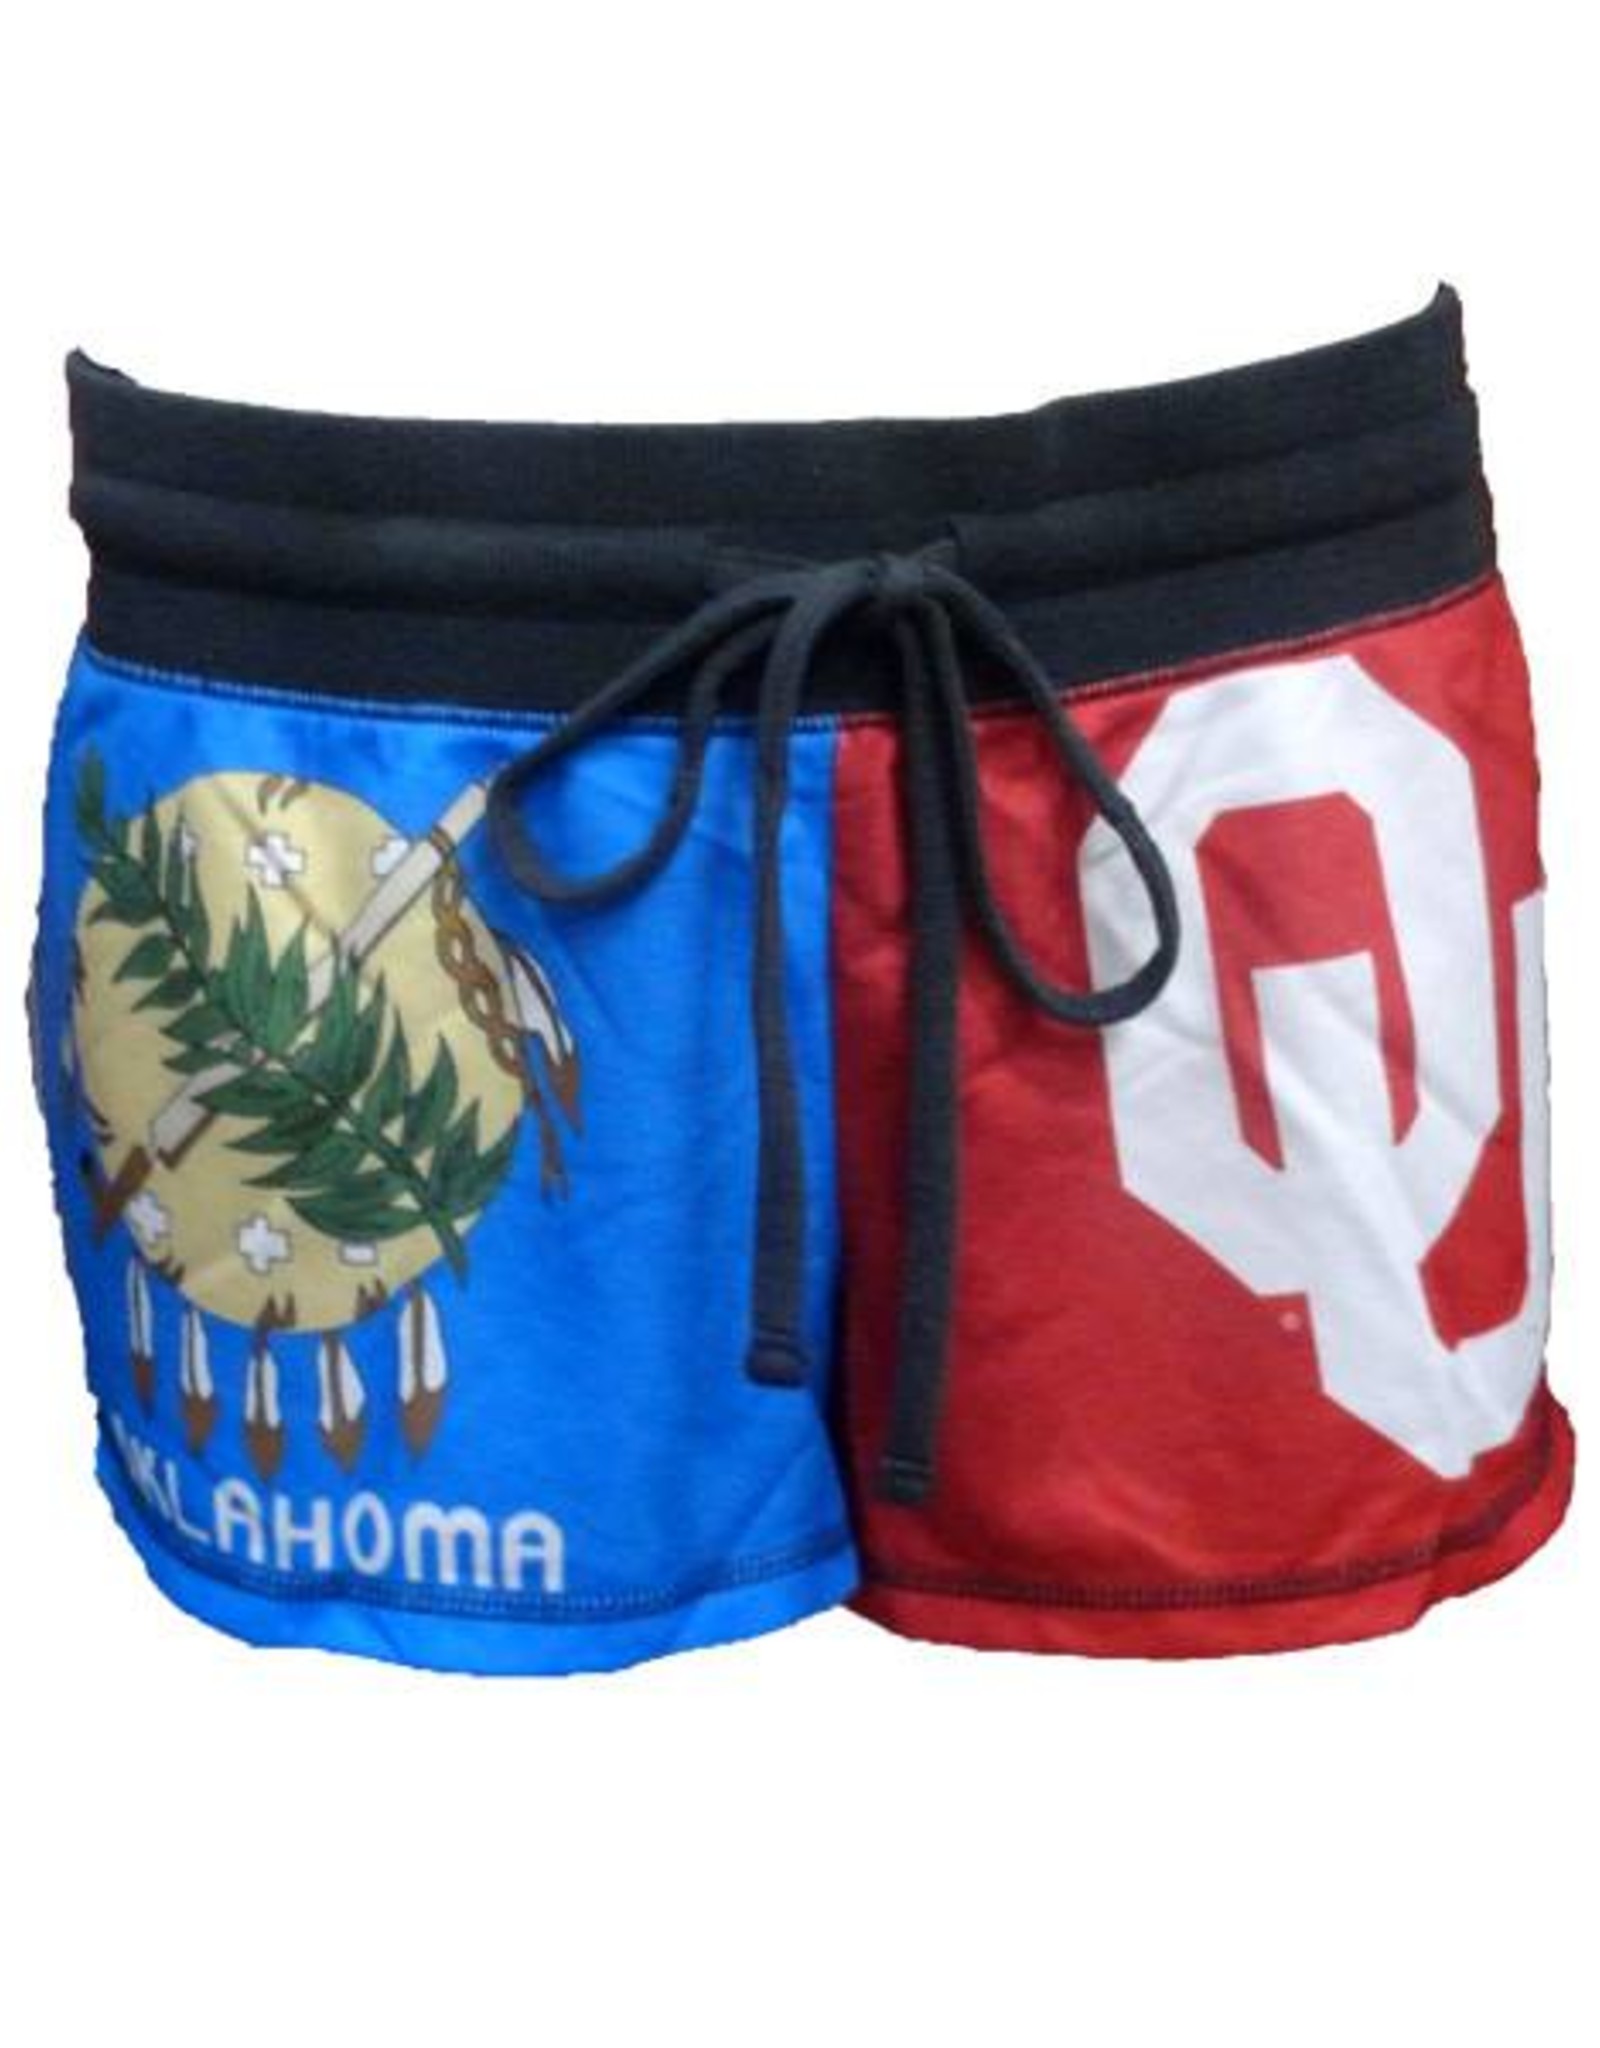 Concepts Sports Women's Concepts Sports OU and Oklahoma Flag Divided Shorts